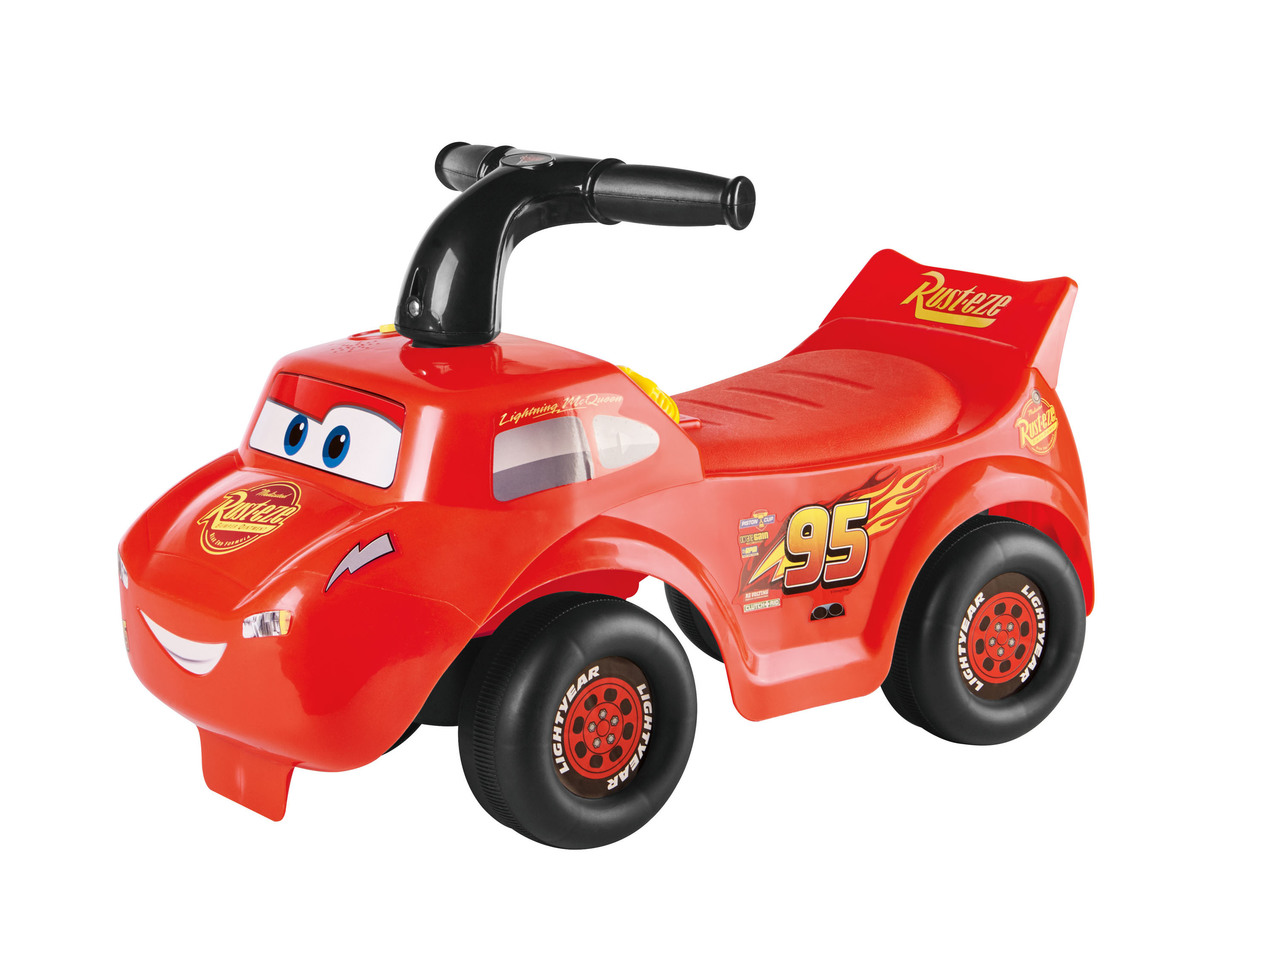 "Cars, Frozen" Vehicles for Kids